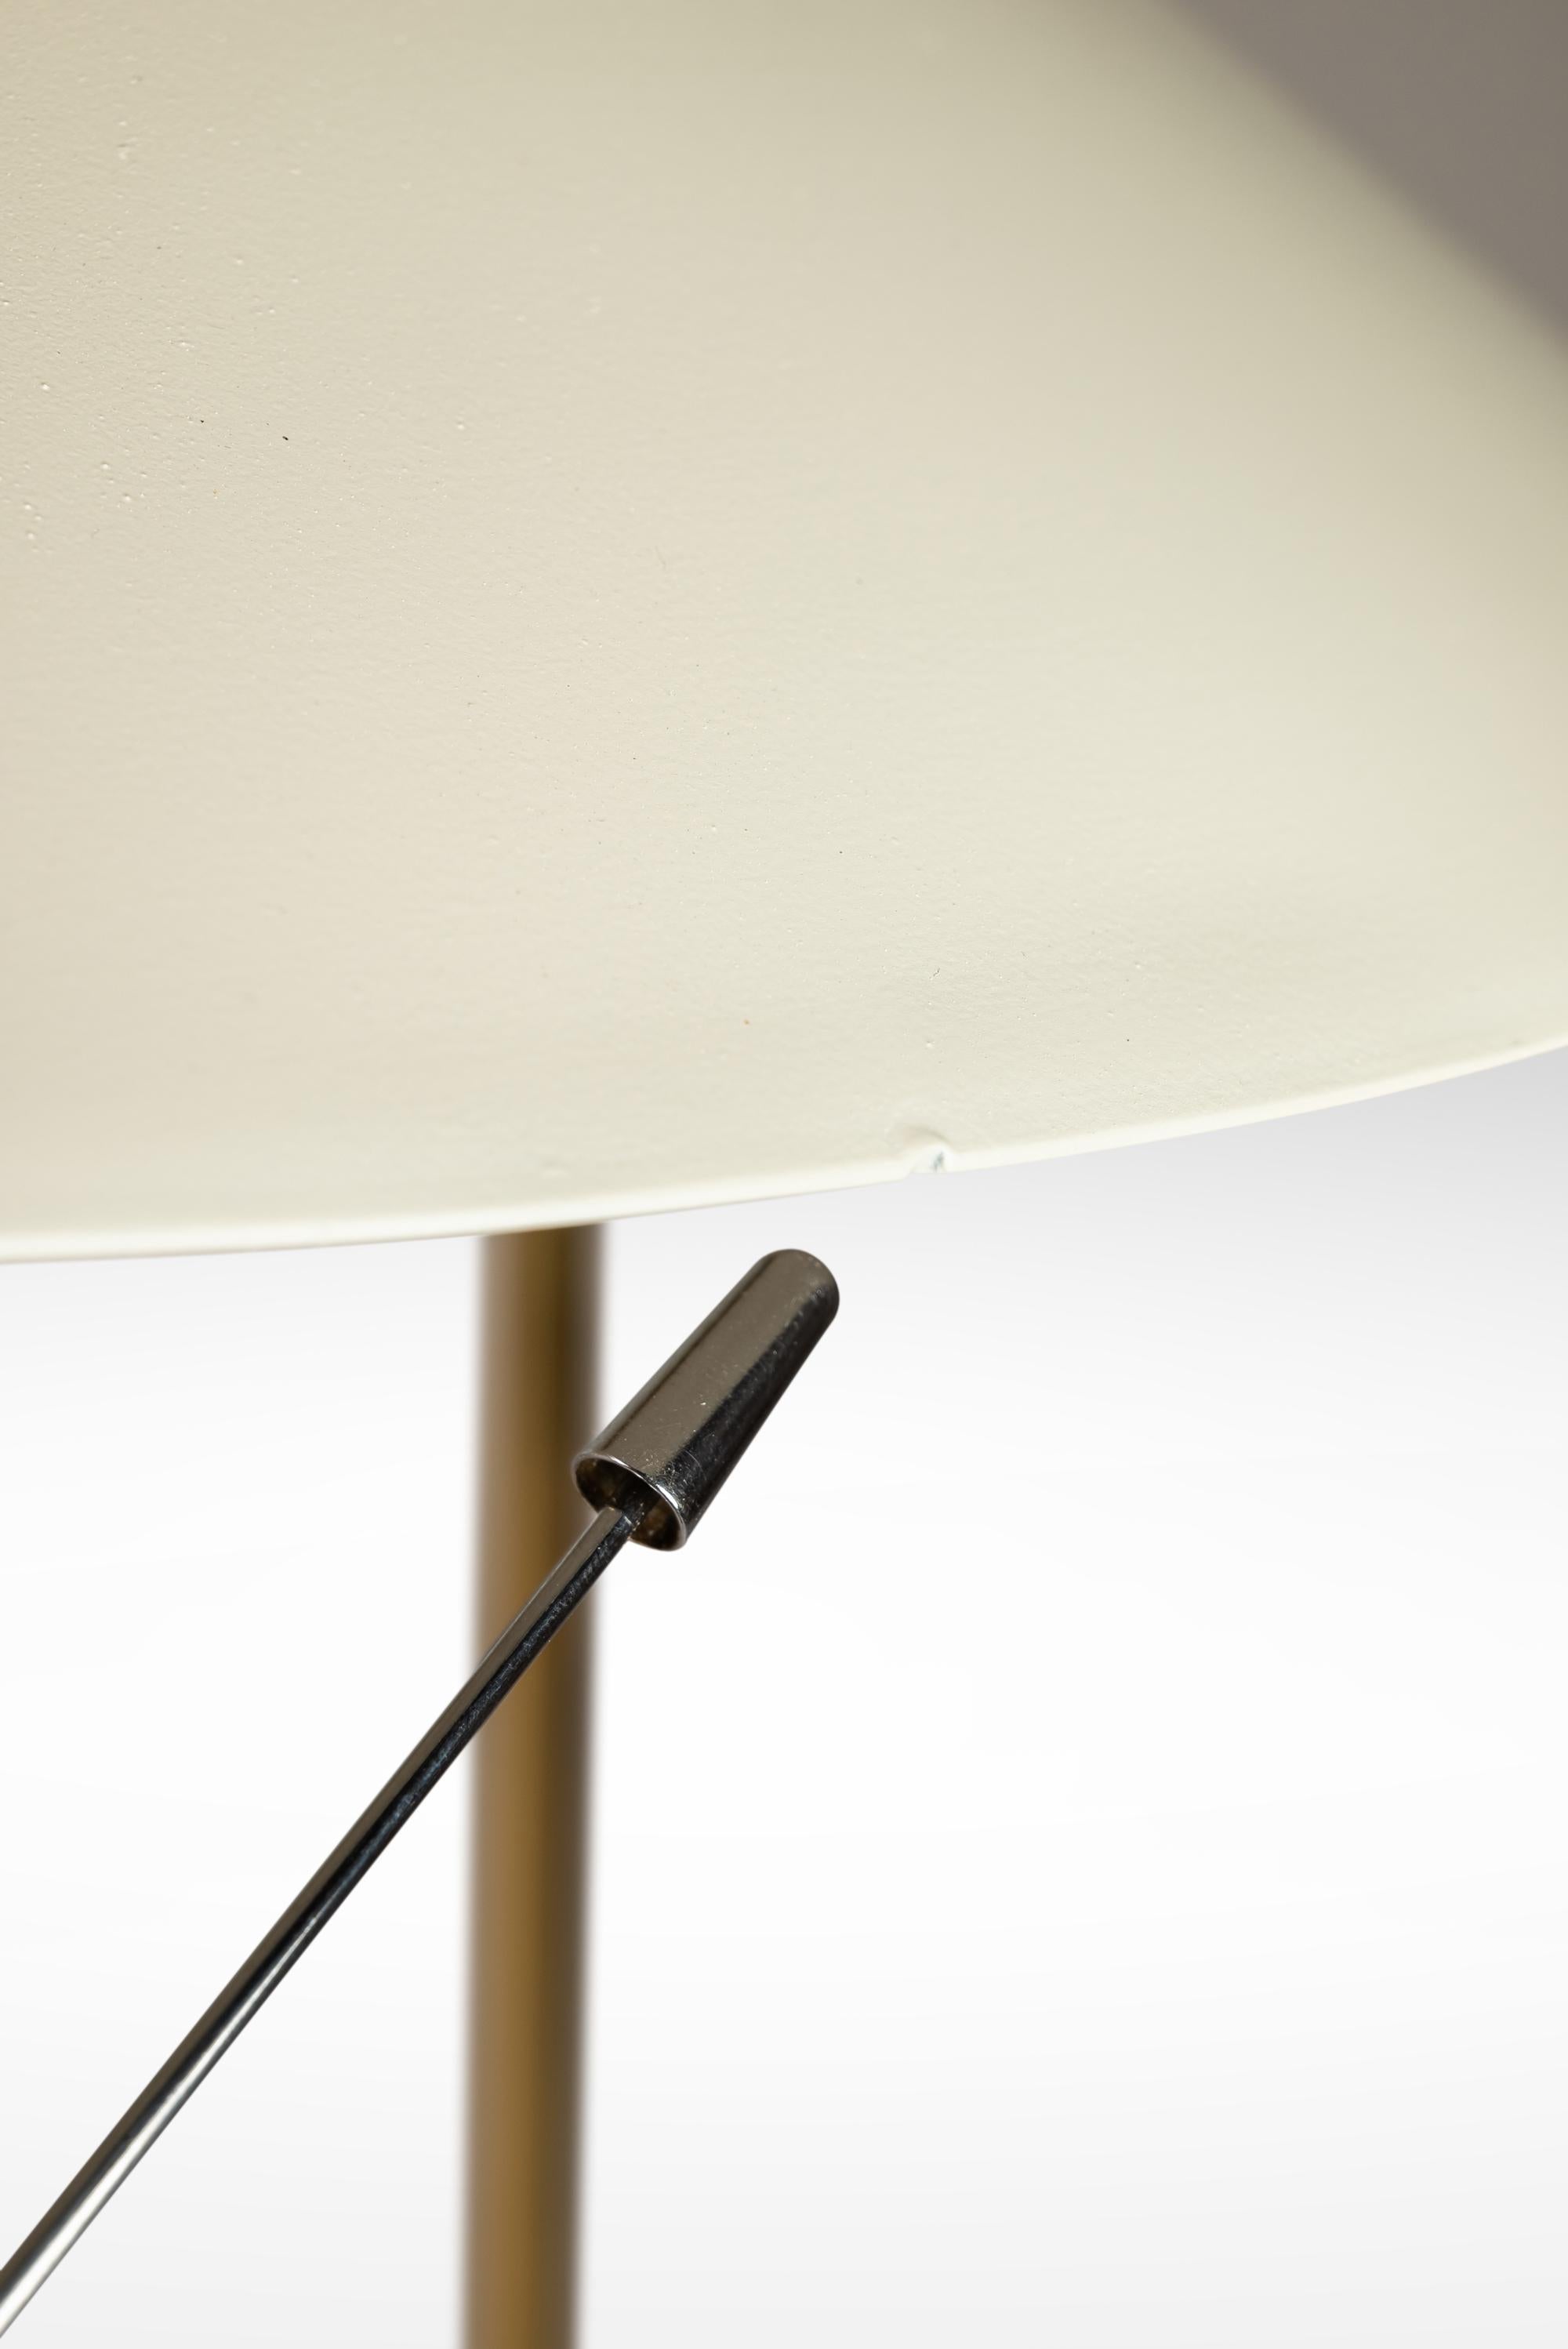 Mid-Century Model E-11 Floor Lamp by Paul McCobb for Directional, USA, c. 1950's For Sale 3